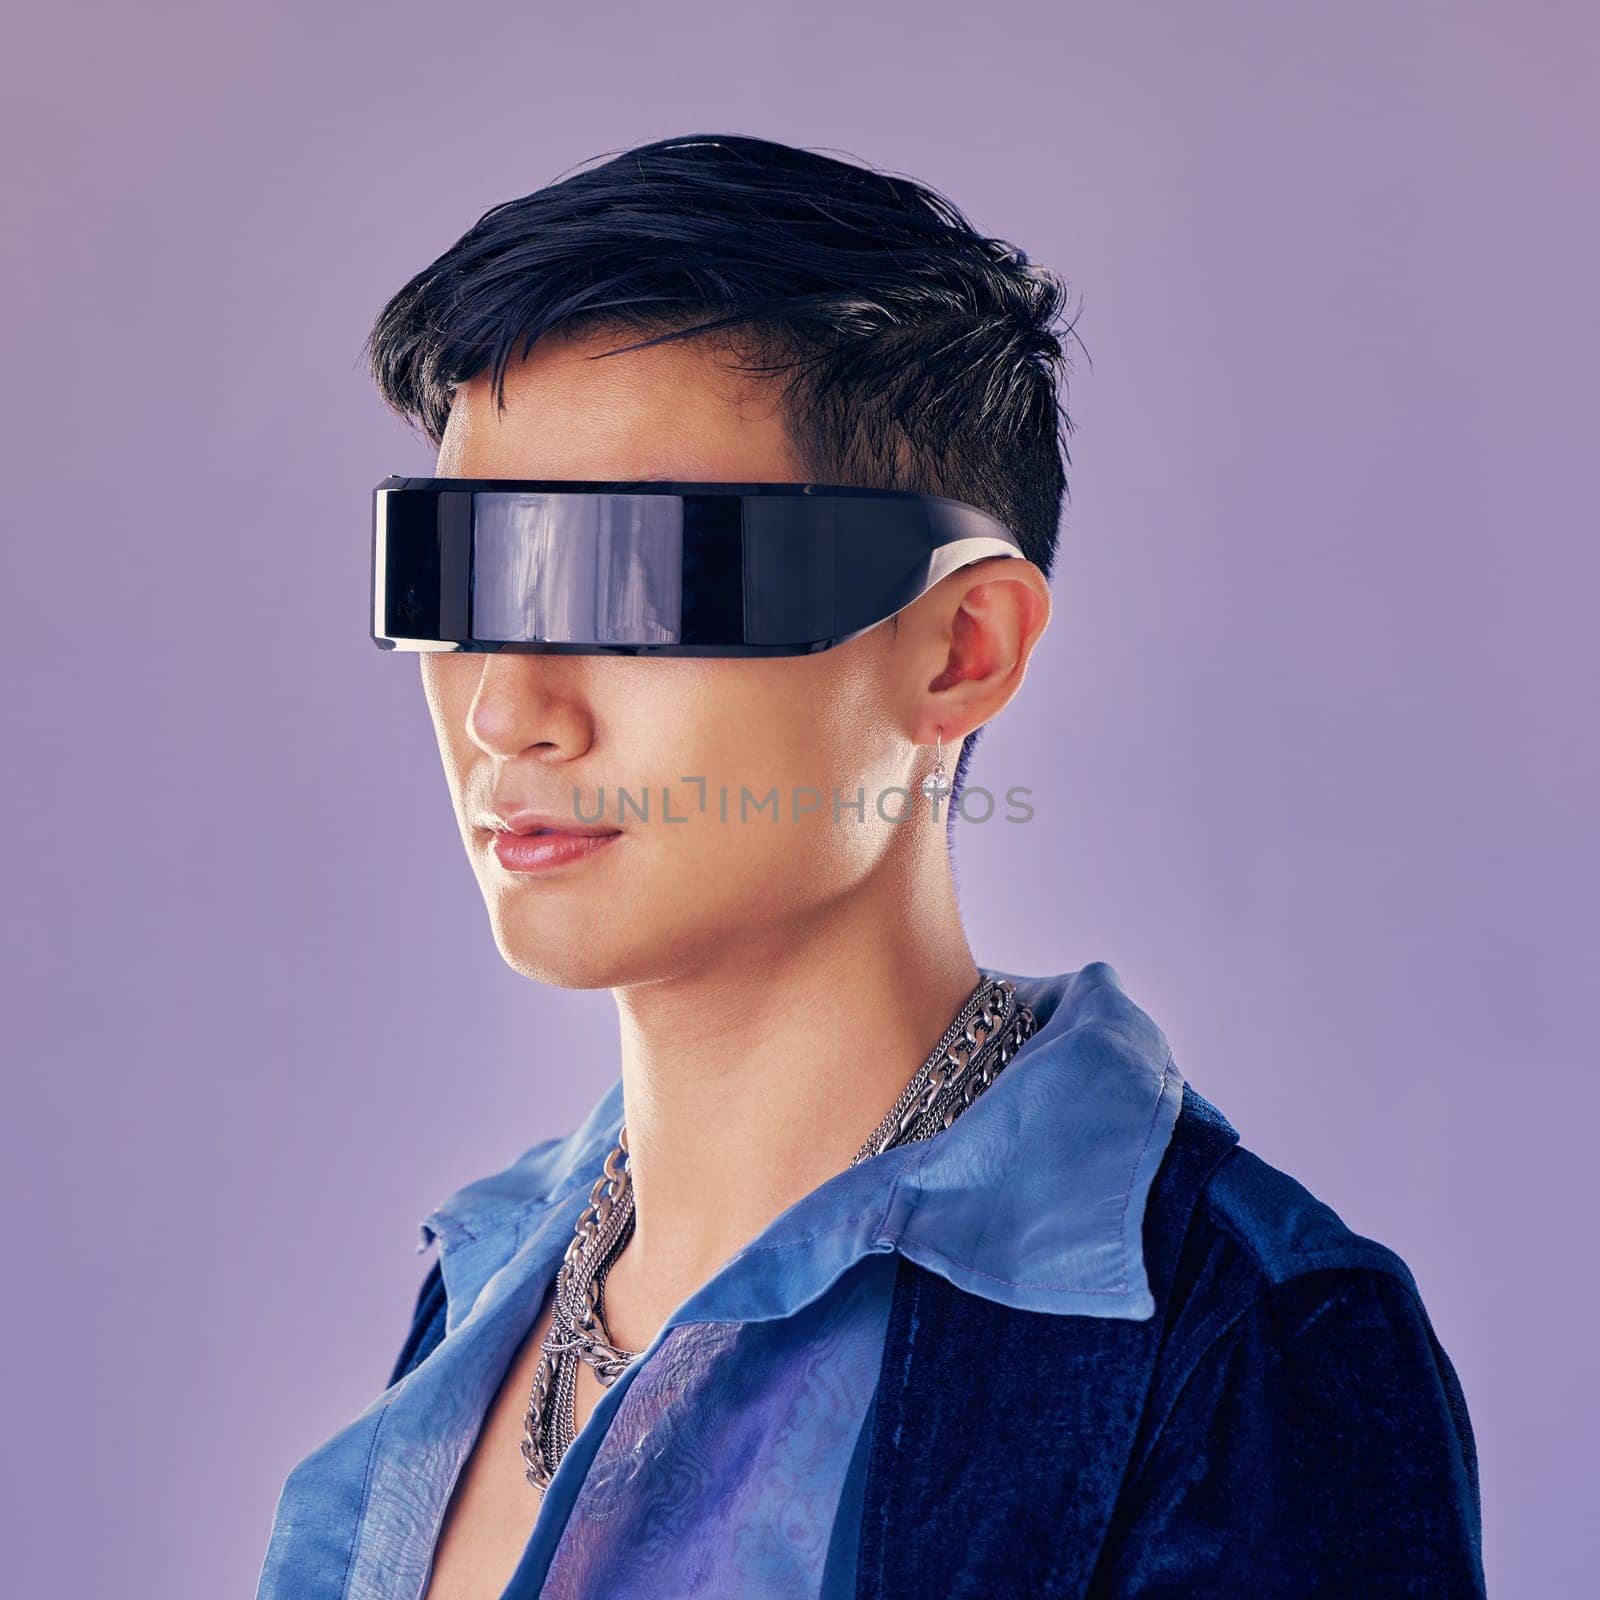 Cyberpunk, fashion and futuristic asian man, jewellery and clothes with cool glasses in purple mockup studio background. Aesthetic, abstract and designer sunglasses on male model with sci fi style by YuriArcurs